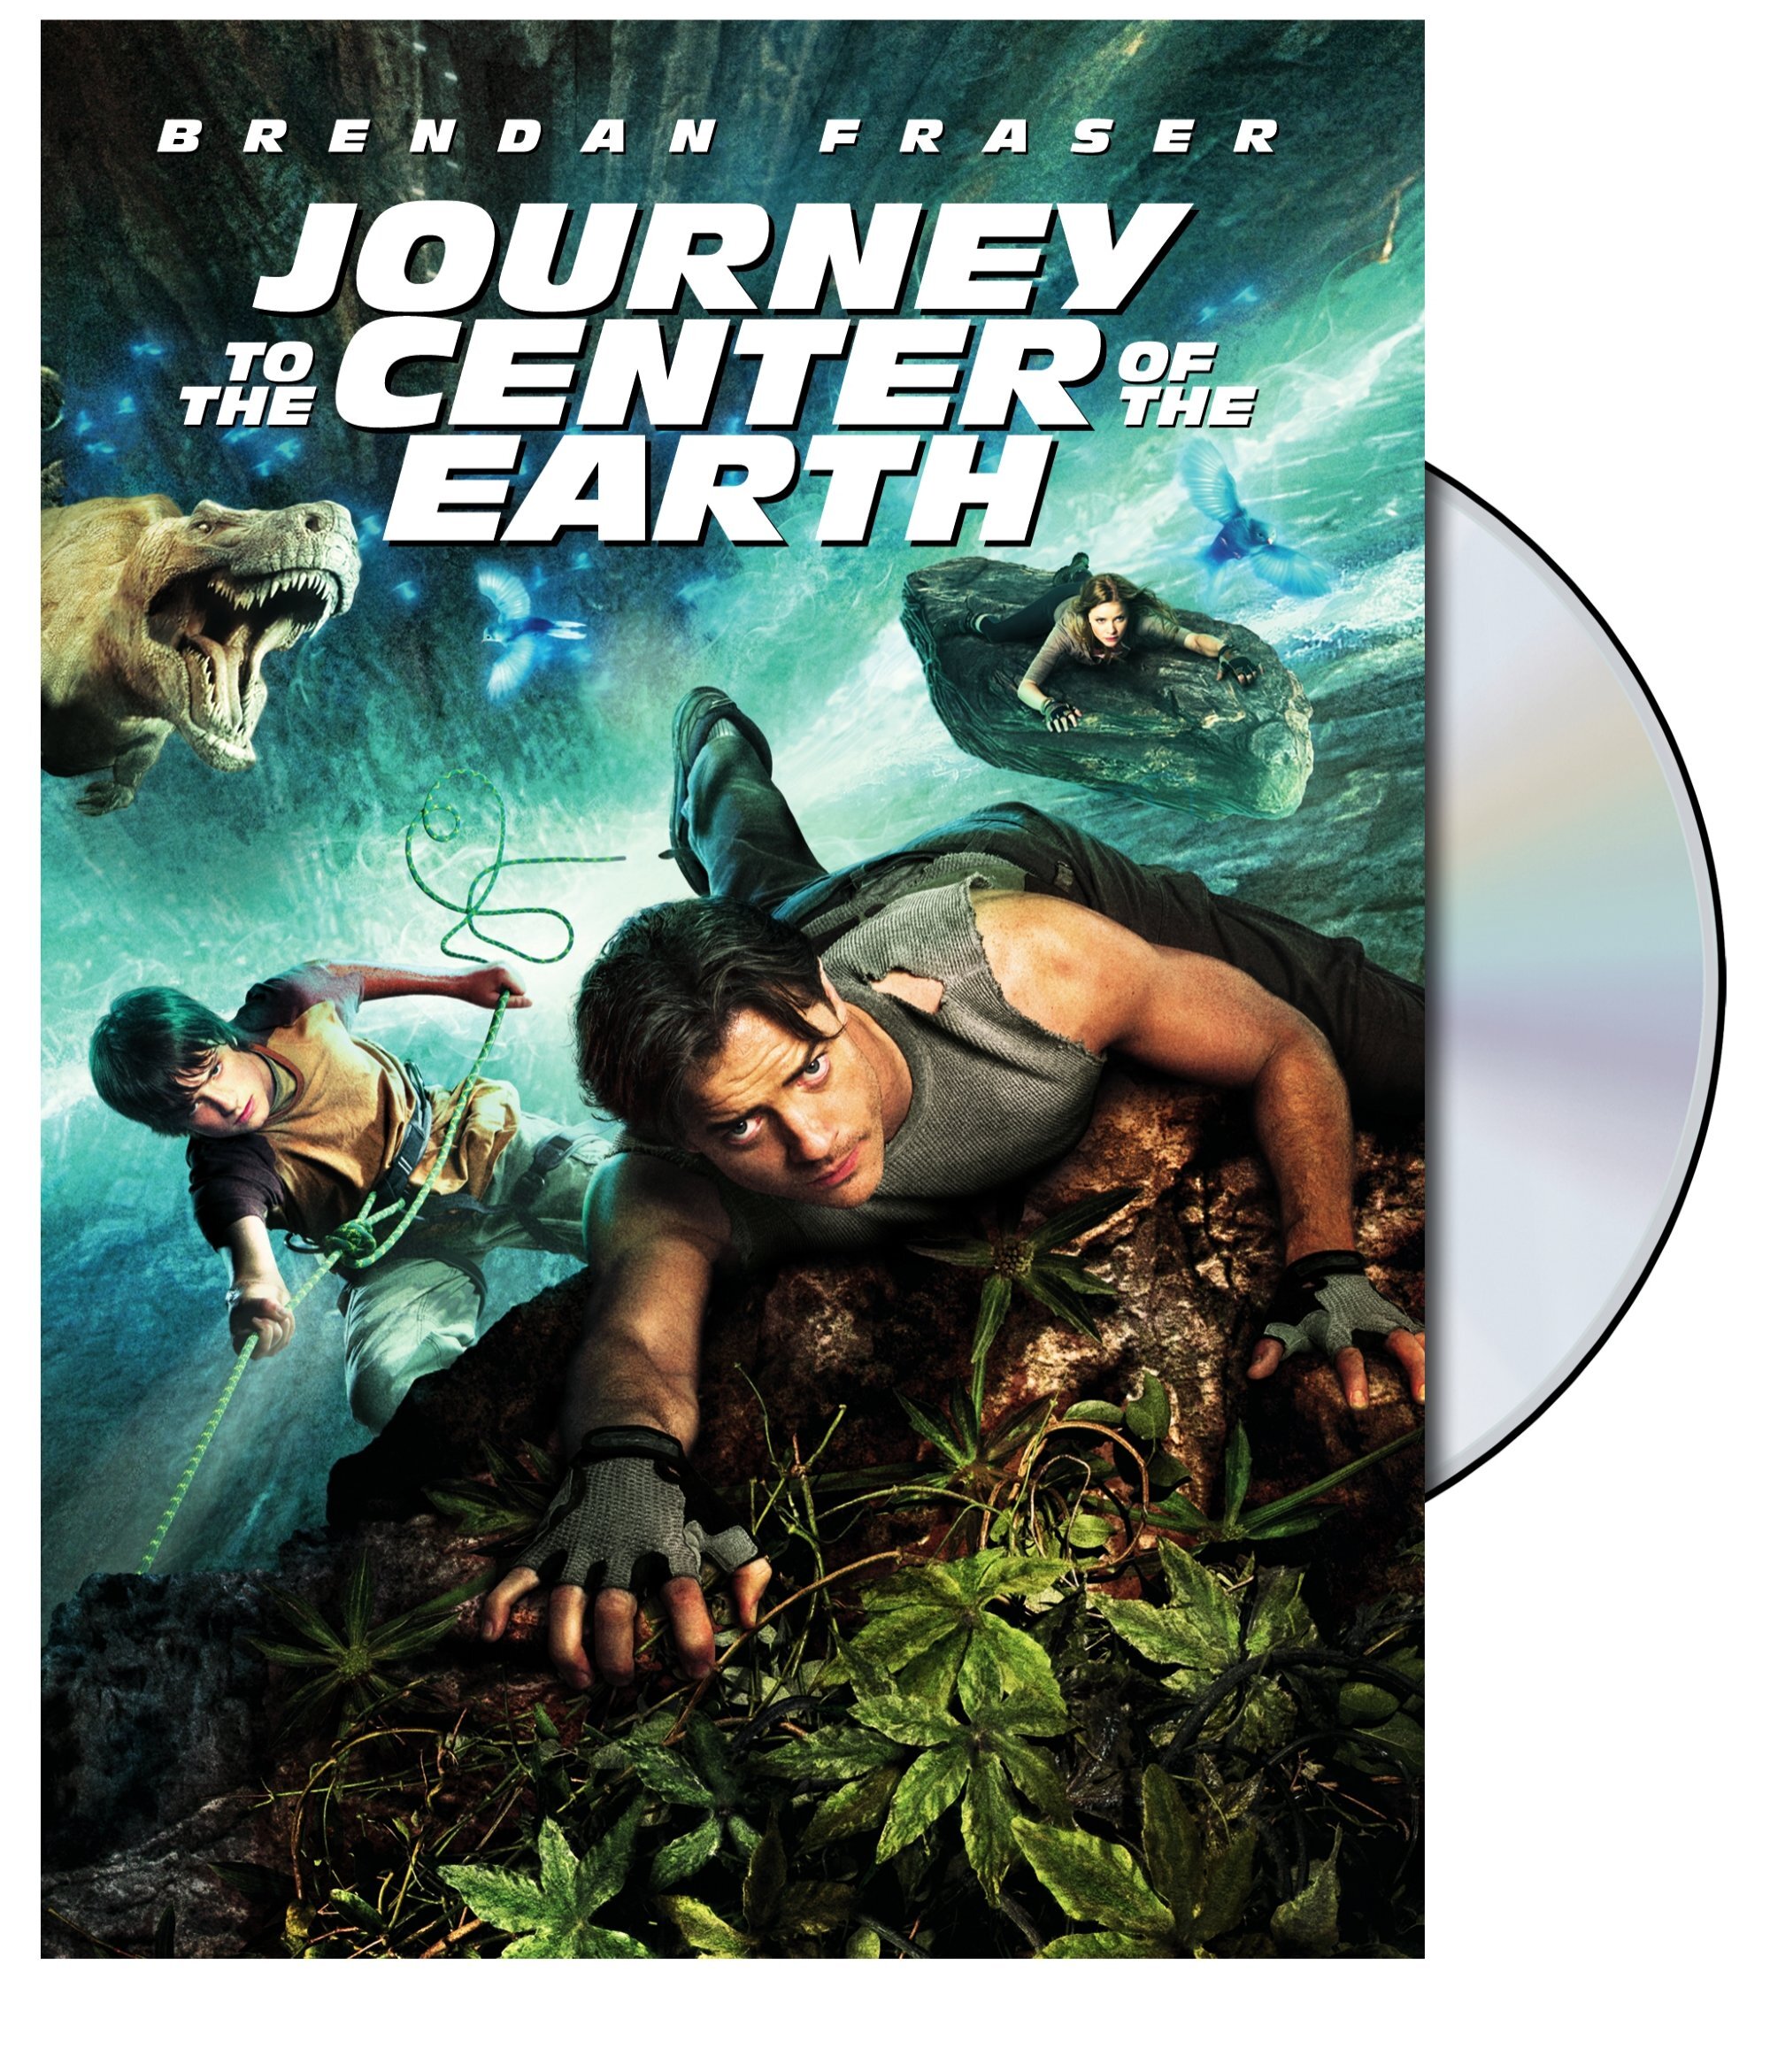 Journey To The Center Of The Earth - DVD [ 2008 ]  - Action Movies On DVD - Movies On GRUV